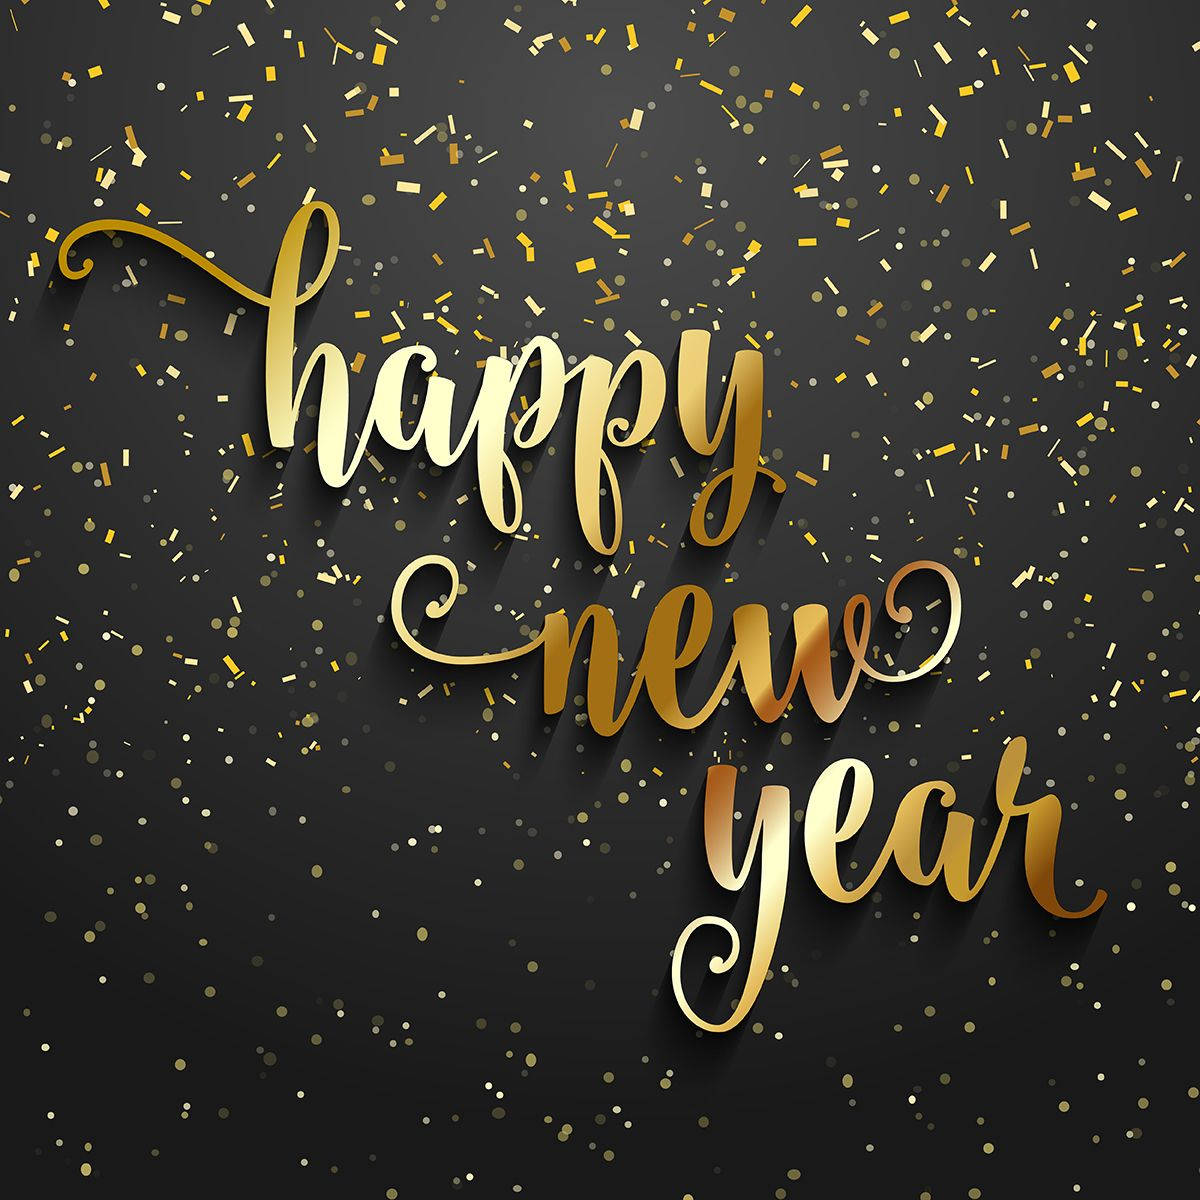 Gold Happy New Year Greetings Wallpaper